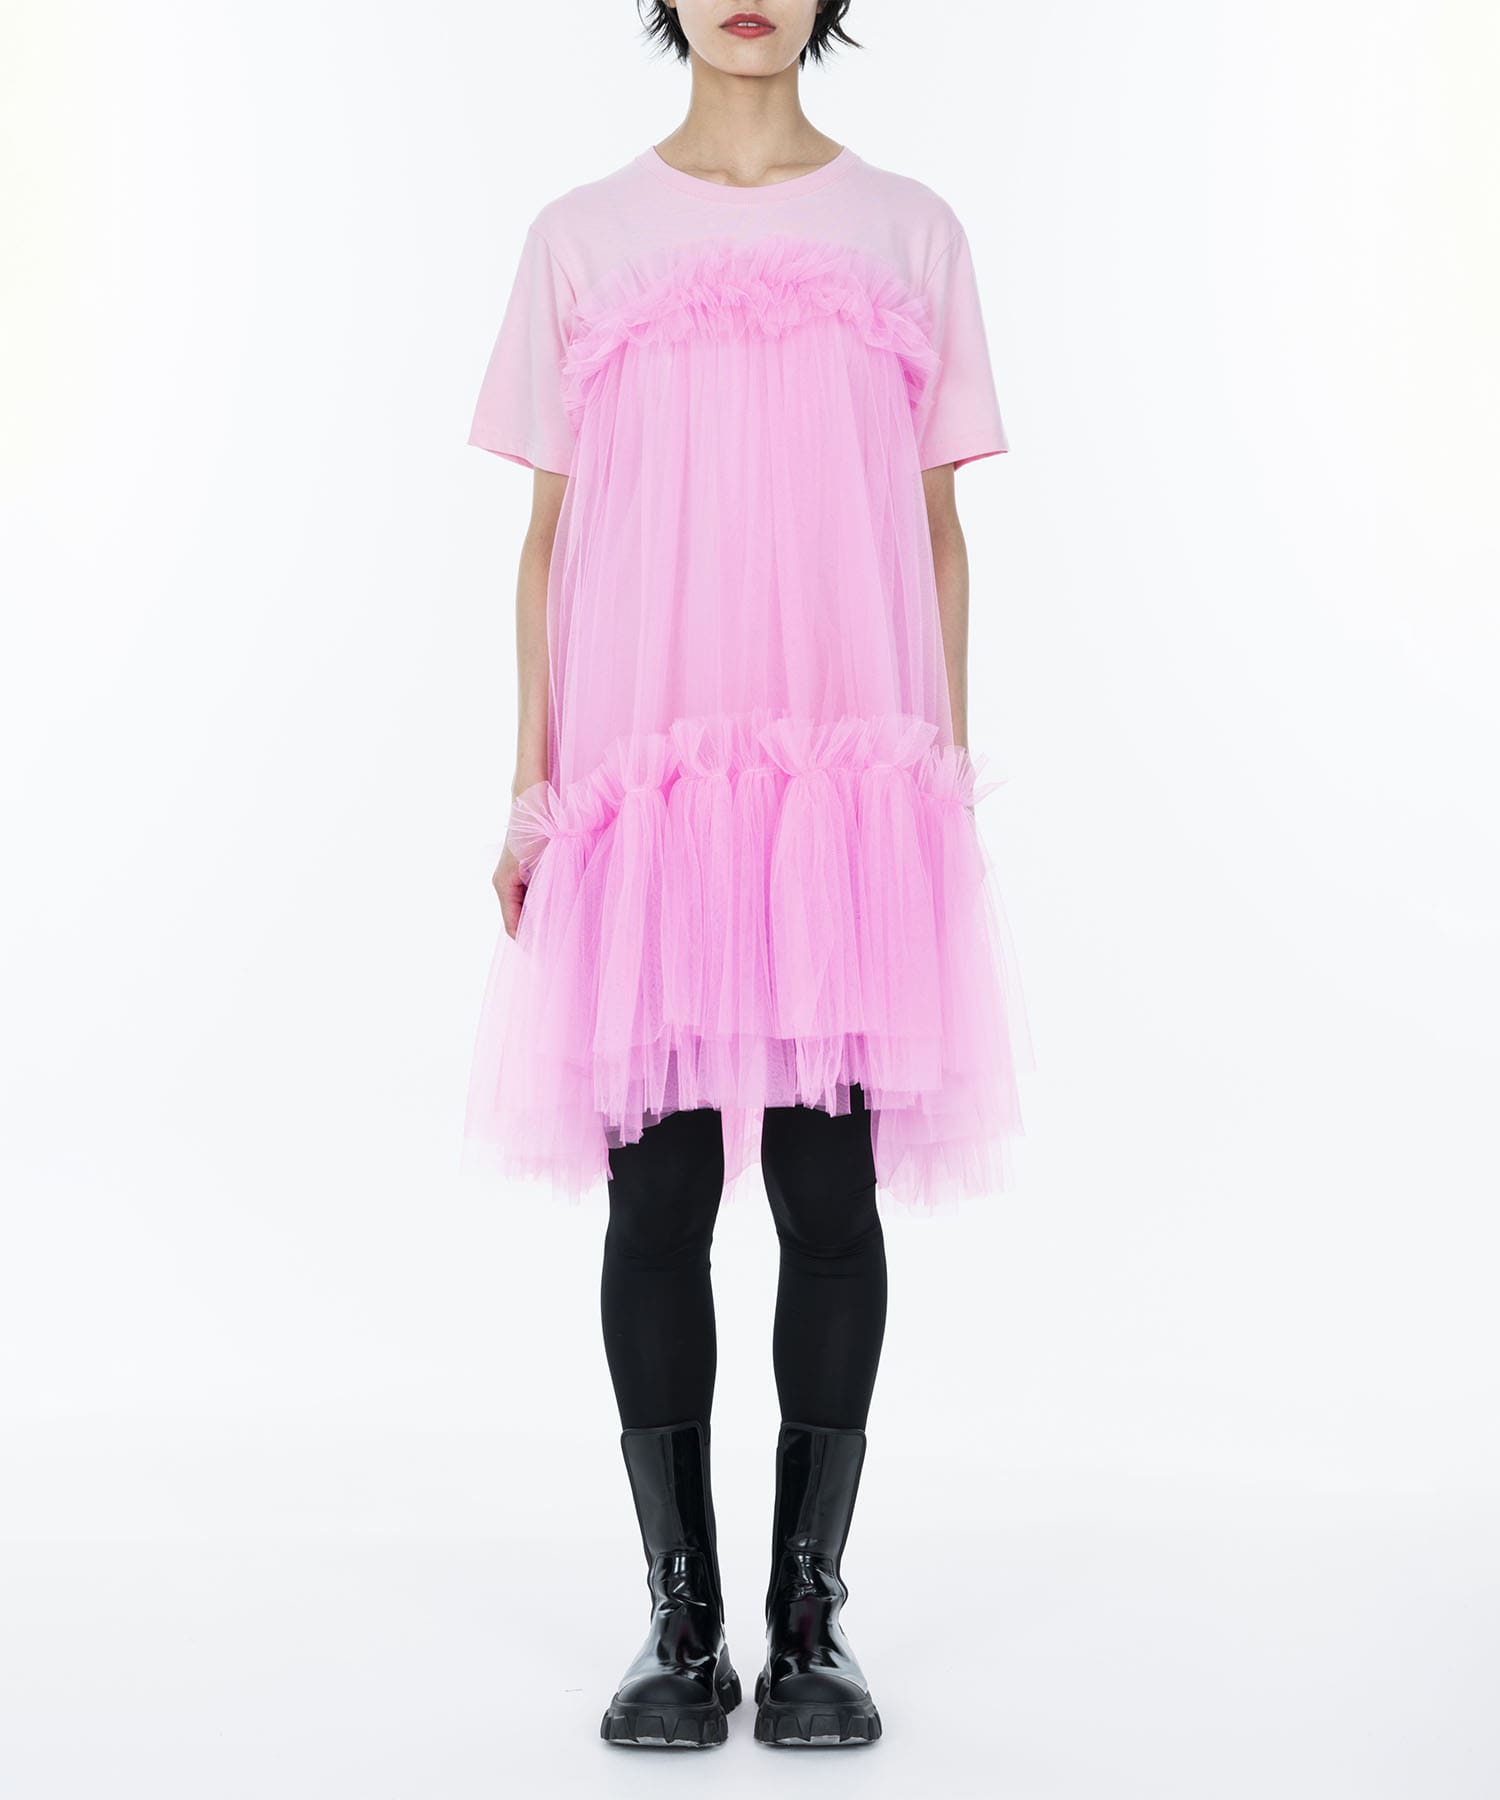 Gatehered Tulle T-shirt